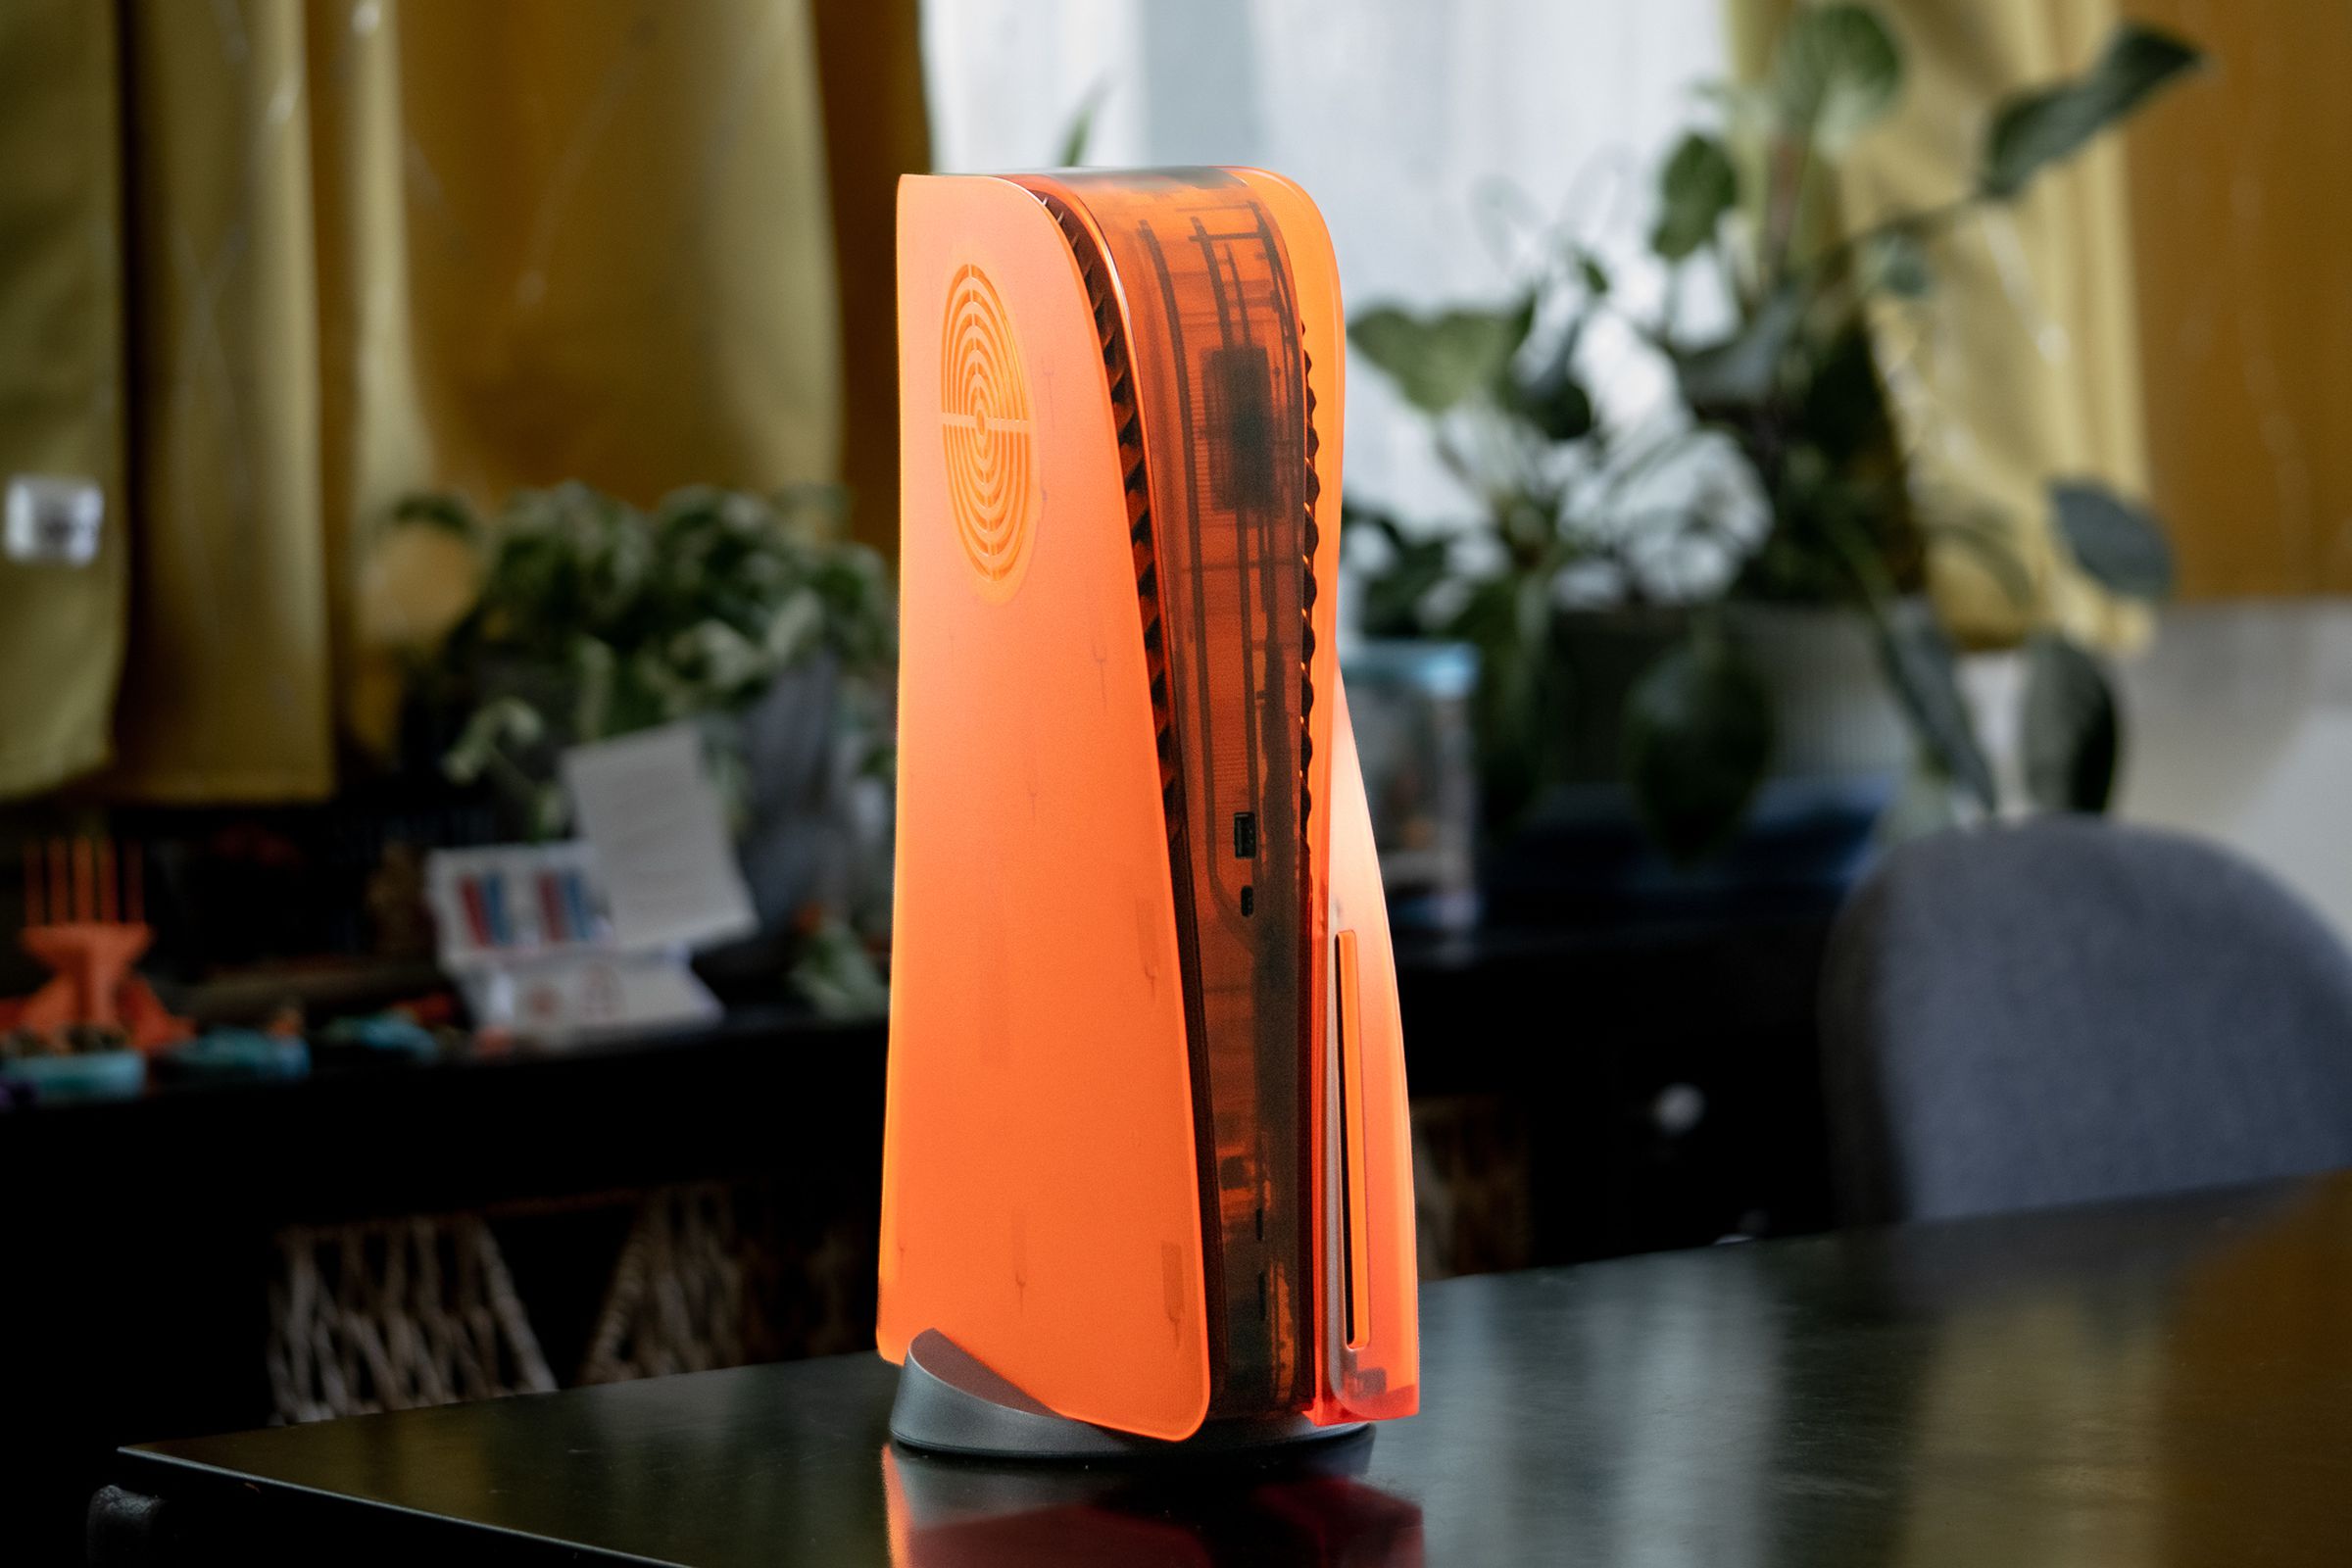 A Sony PlayStation 5 game console stands upright with translucent orange sides and an orange skin running up and down its center bar.